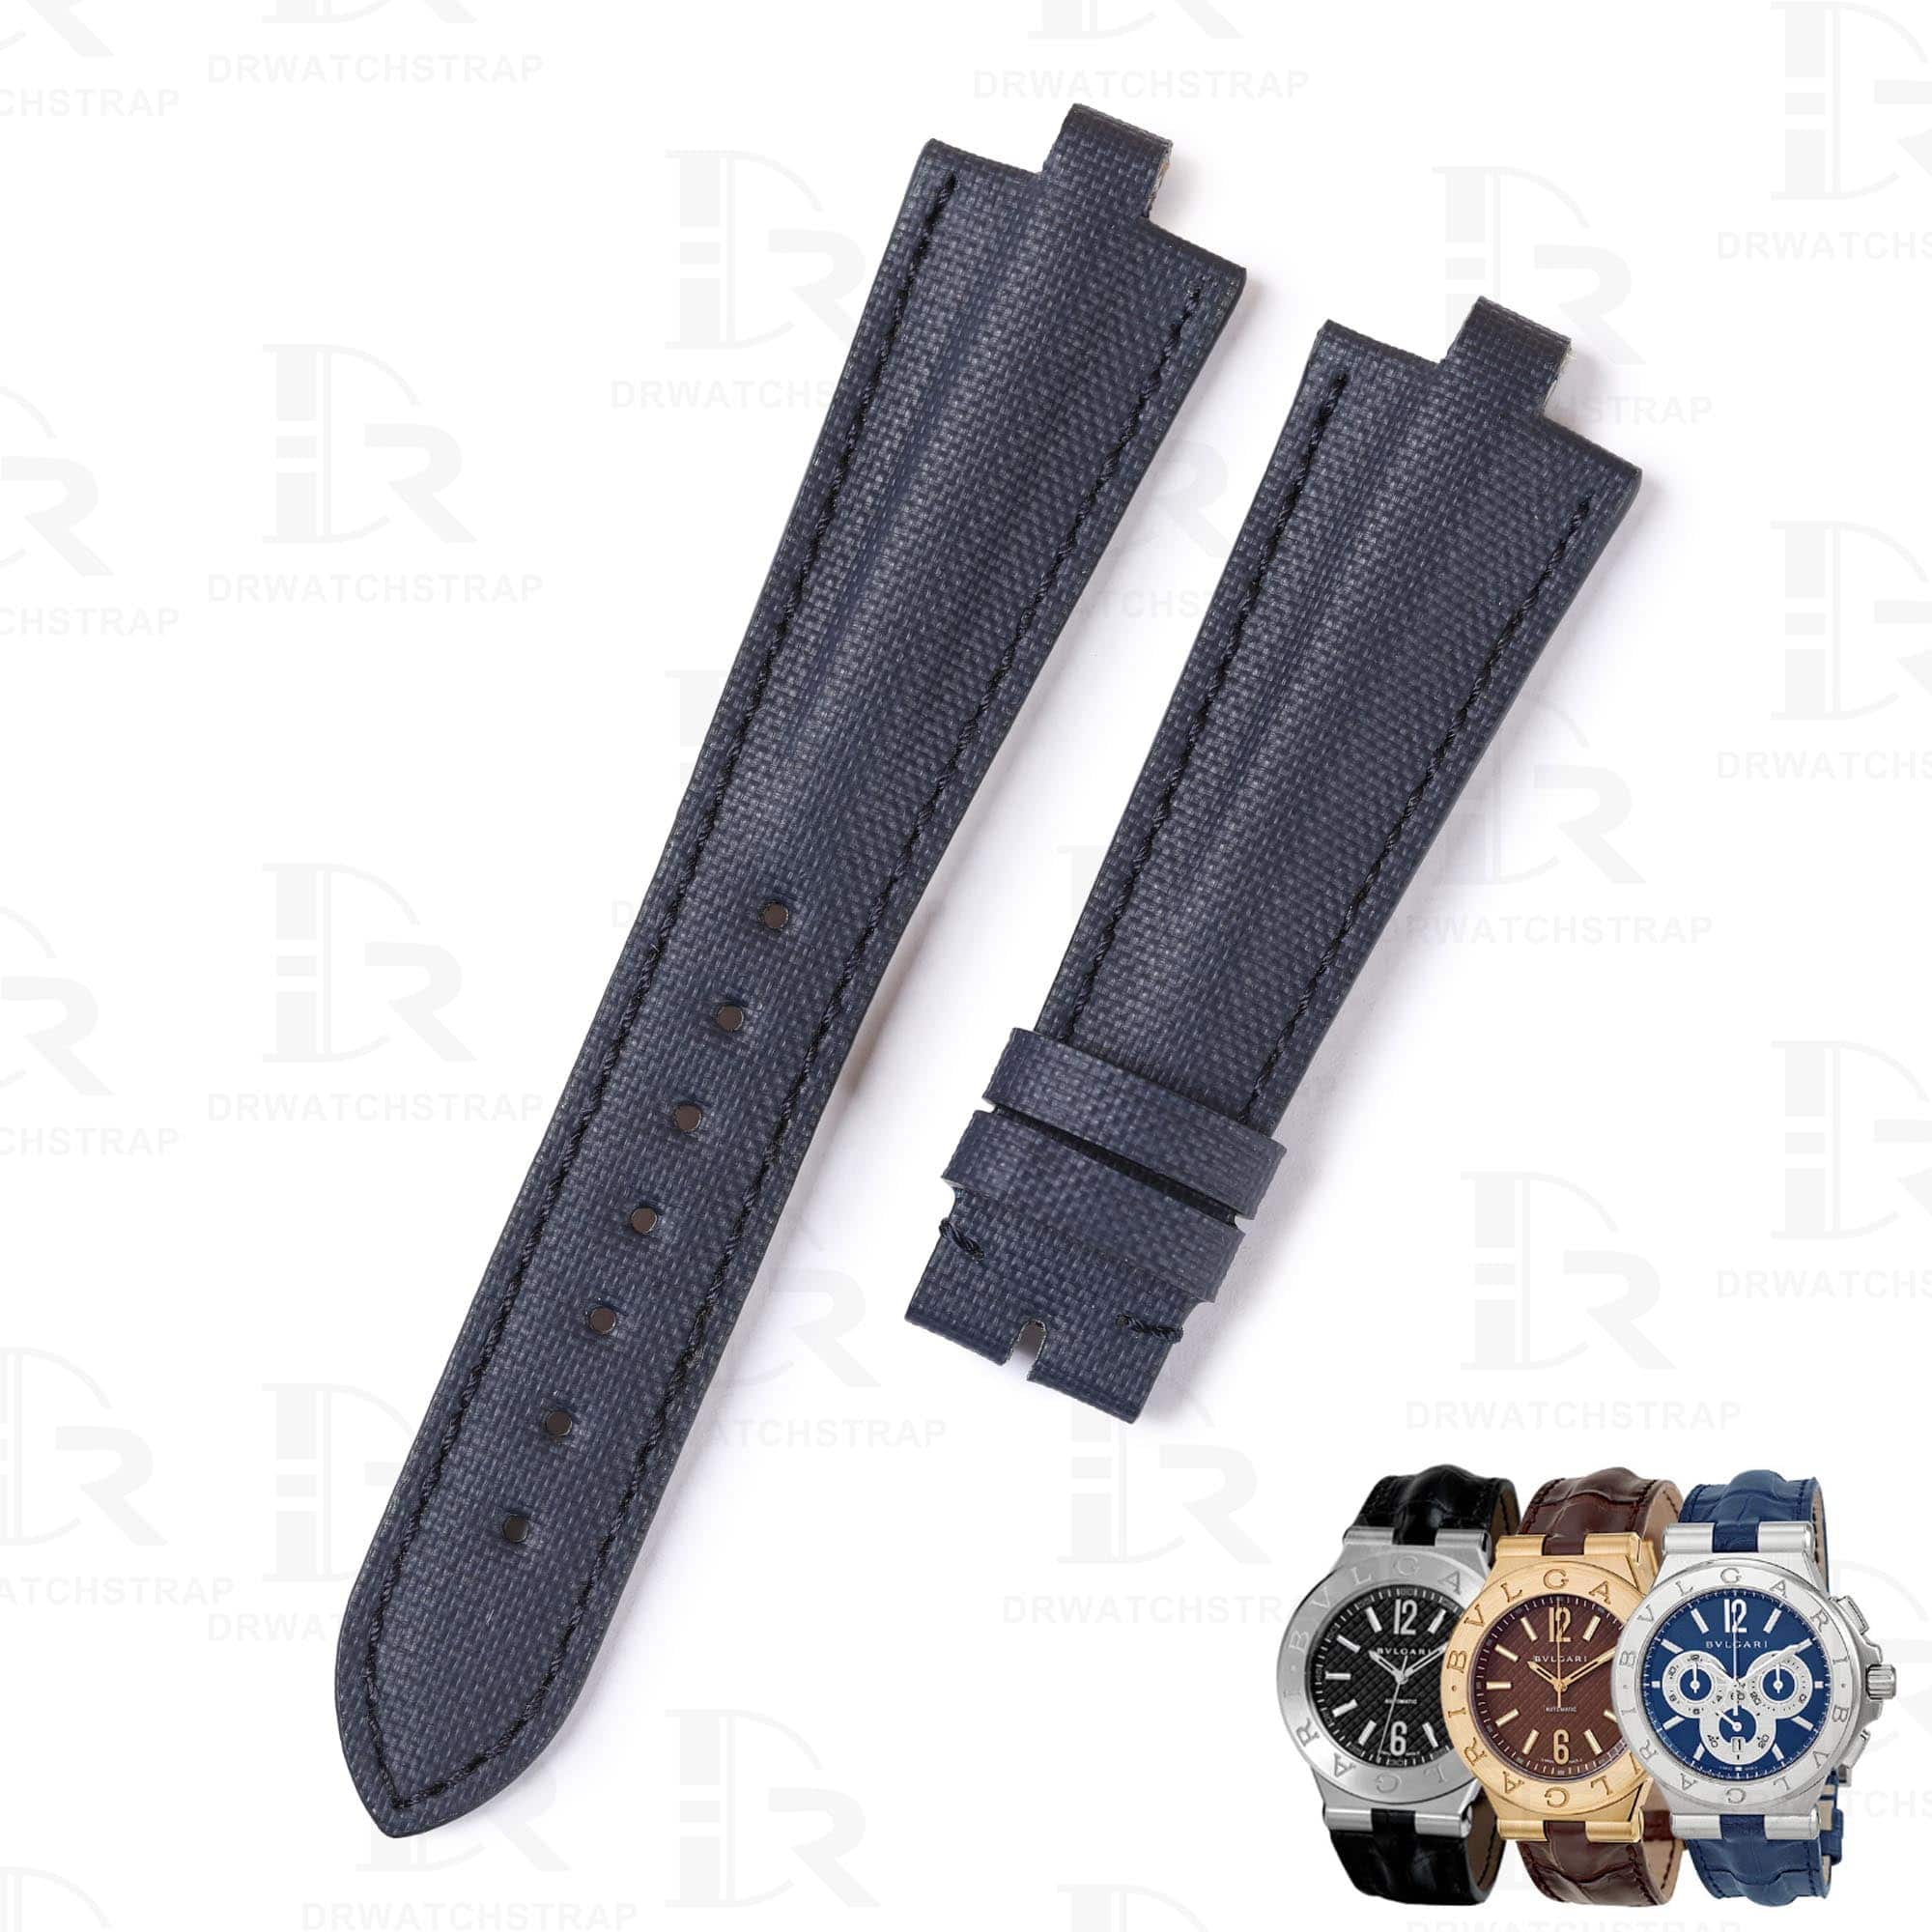 Custom high-end quality blue nylon canvas replacement watch strap & watch band for Bvlgari Diagono Aluminium al38a L3276 watch from DRWatchstrap online - Shop the handmade nylon strap with the best kevlar canvas material at a low price